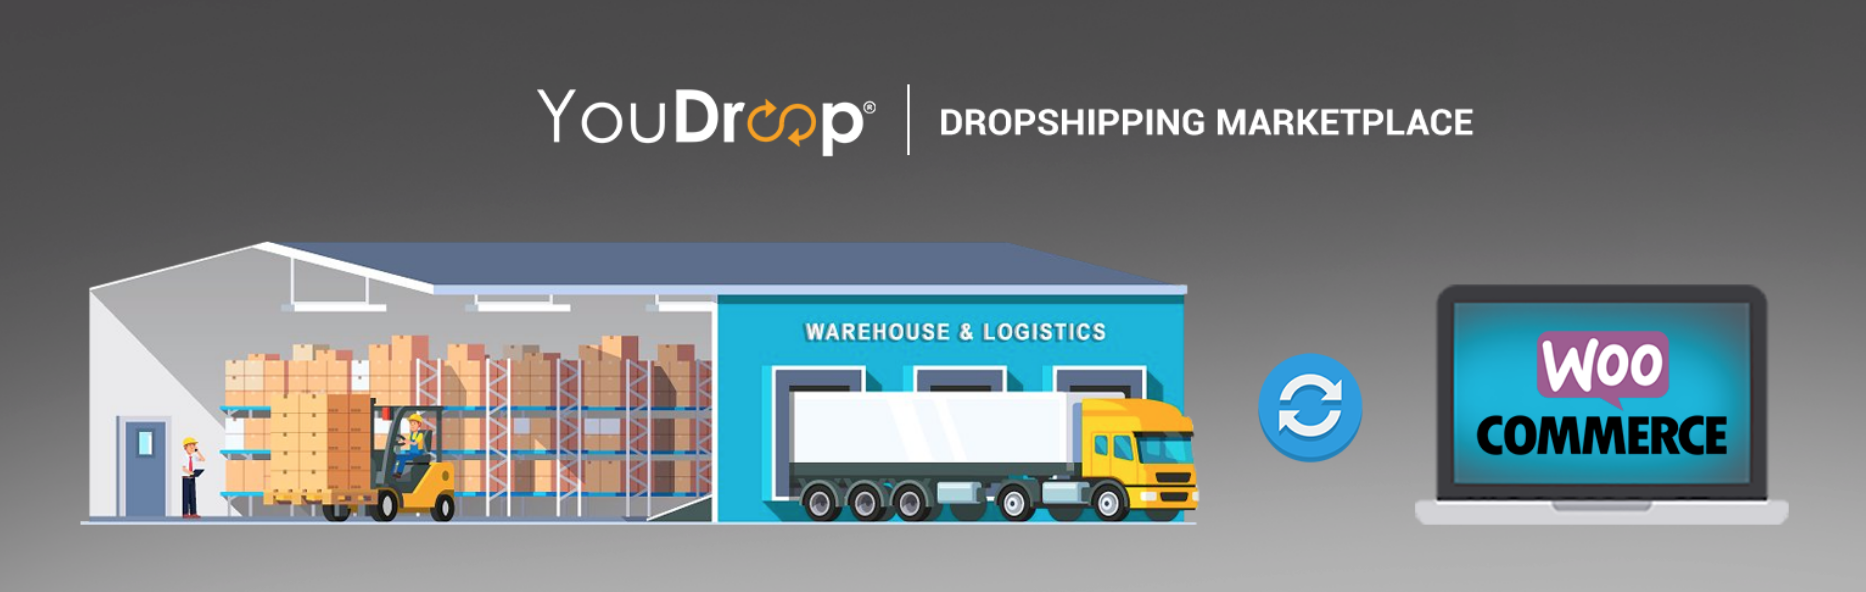 YouDroop WooCommerce Dropshipping